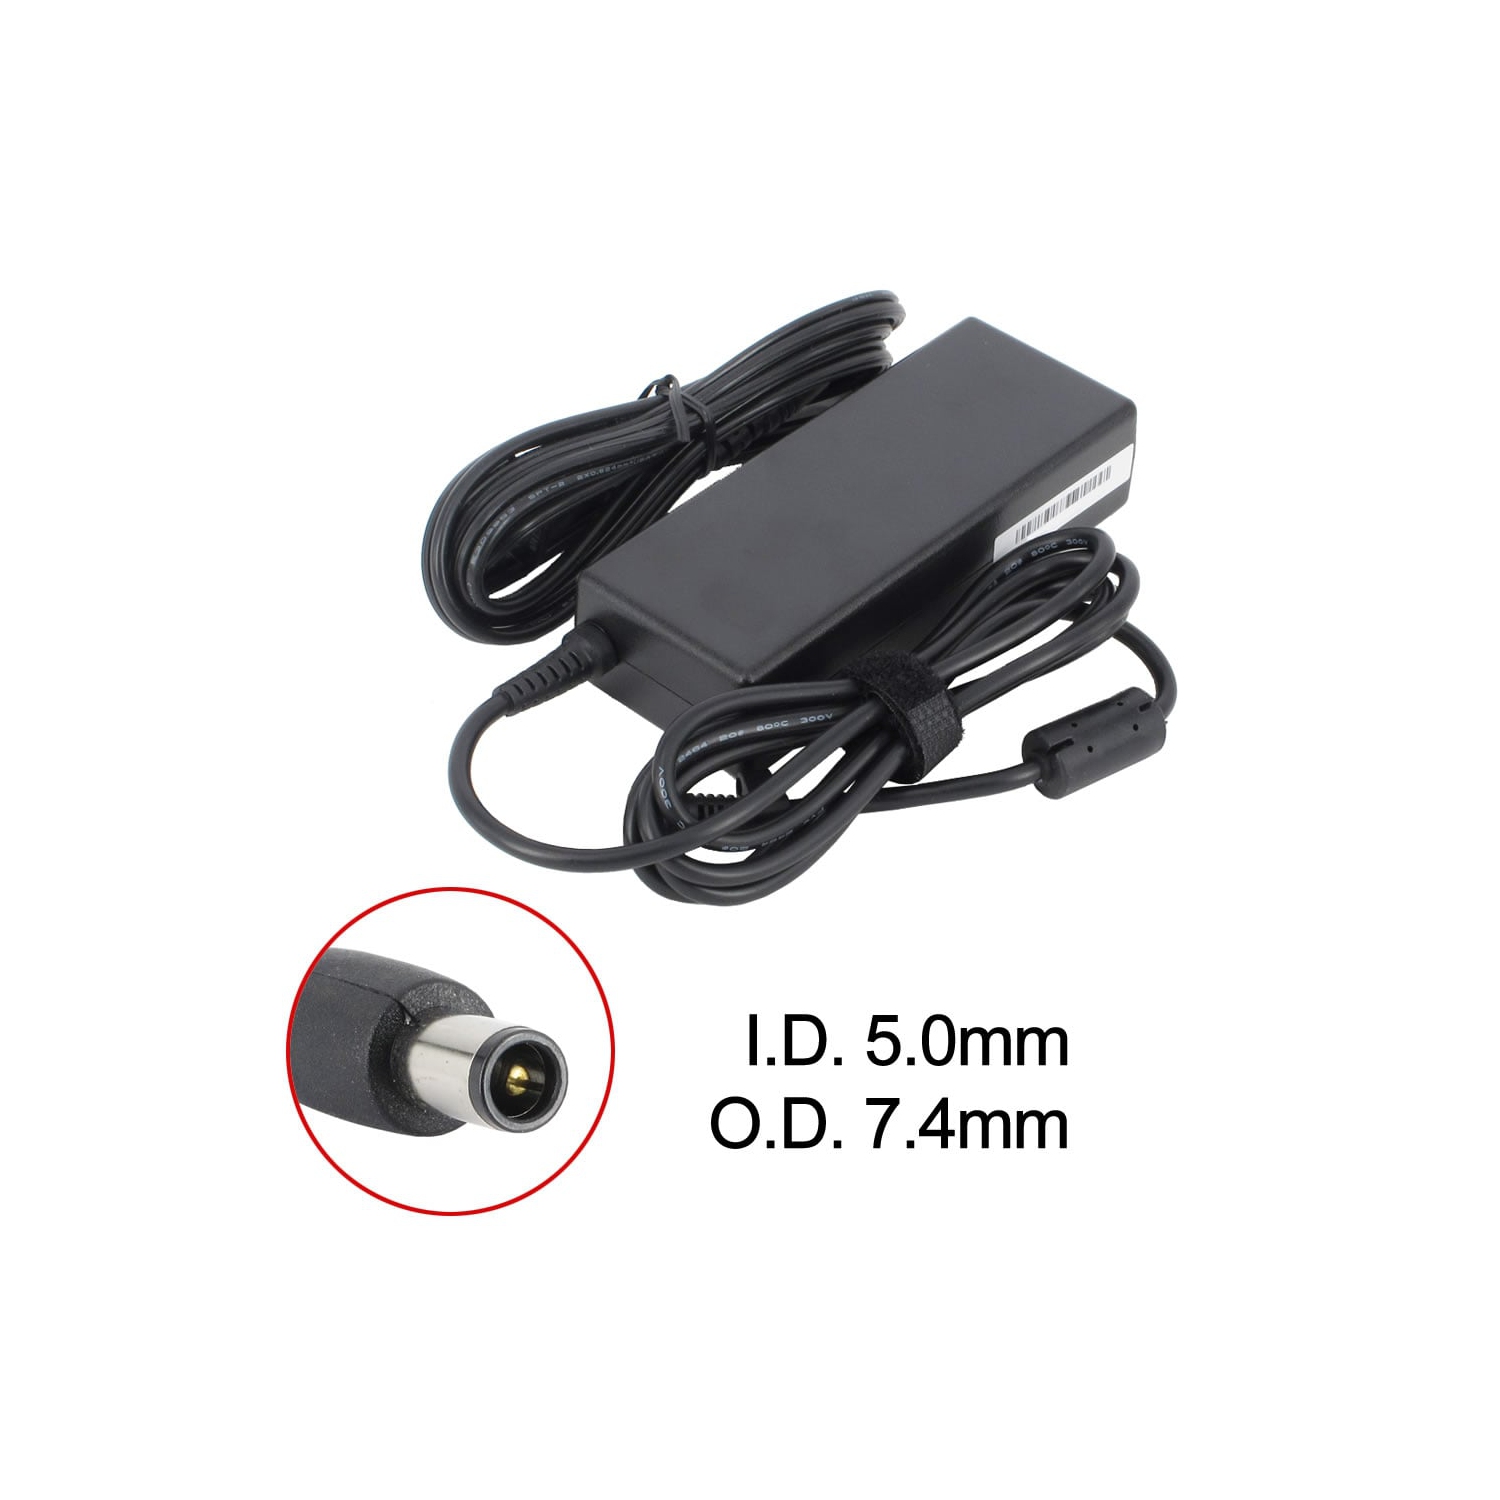 BATTDEPOT New Laptop AC Adapter for HP Pavilion g6-2200ee 409992-001 463554-001 609940-001 HP-AP091F13 LF SE PPP009L-E PPP009H